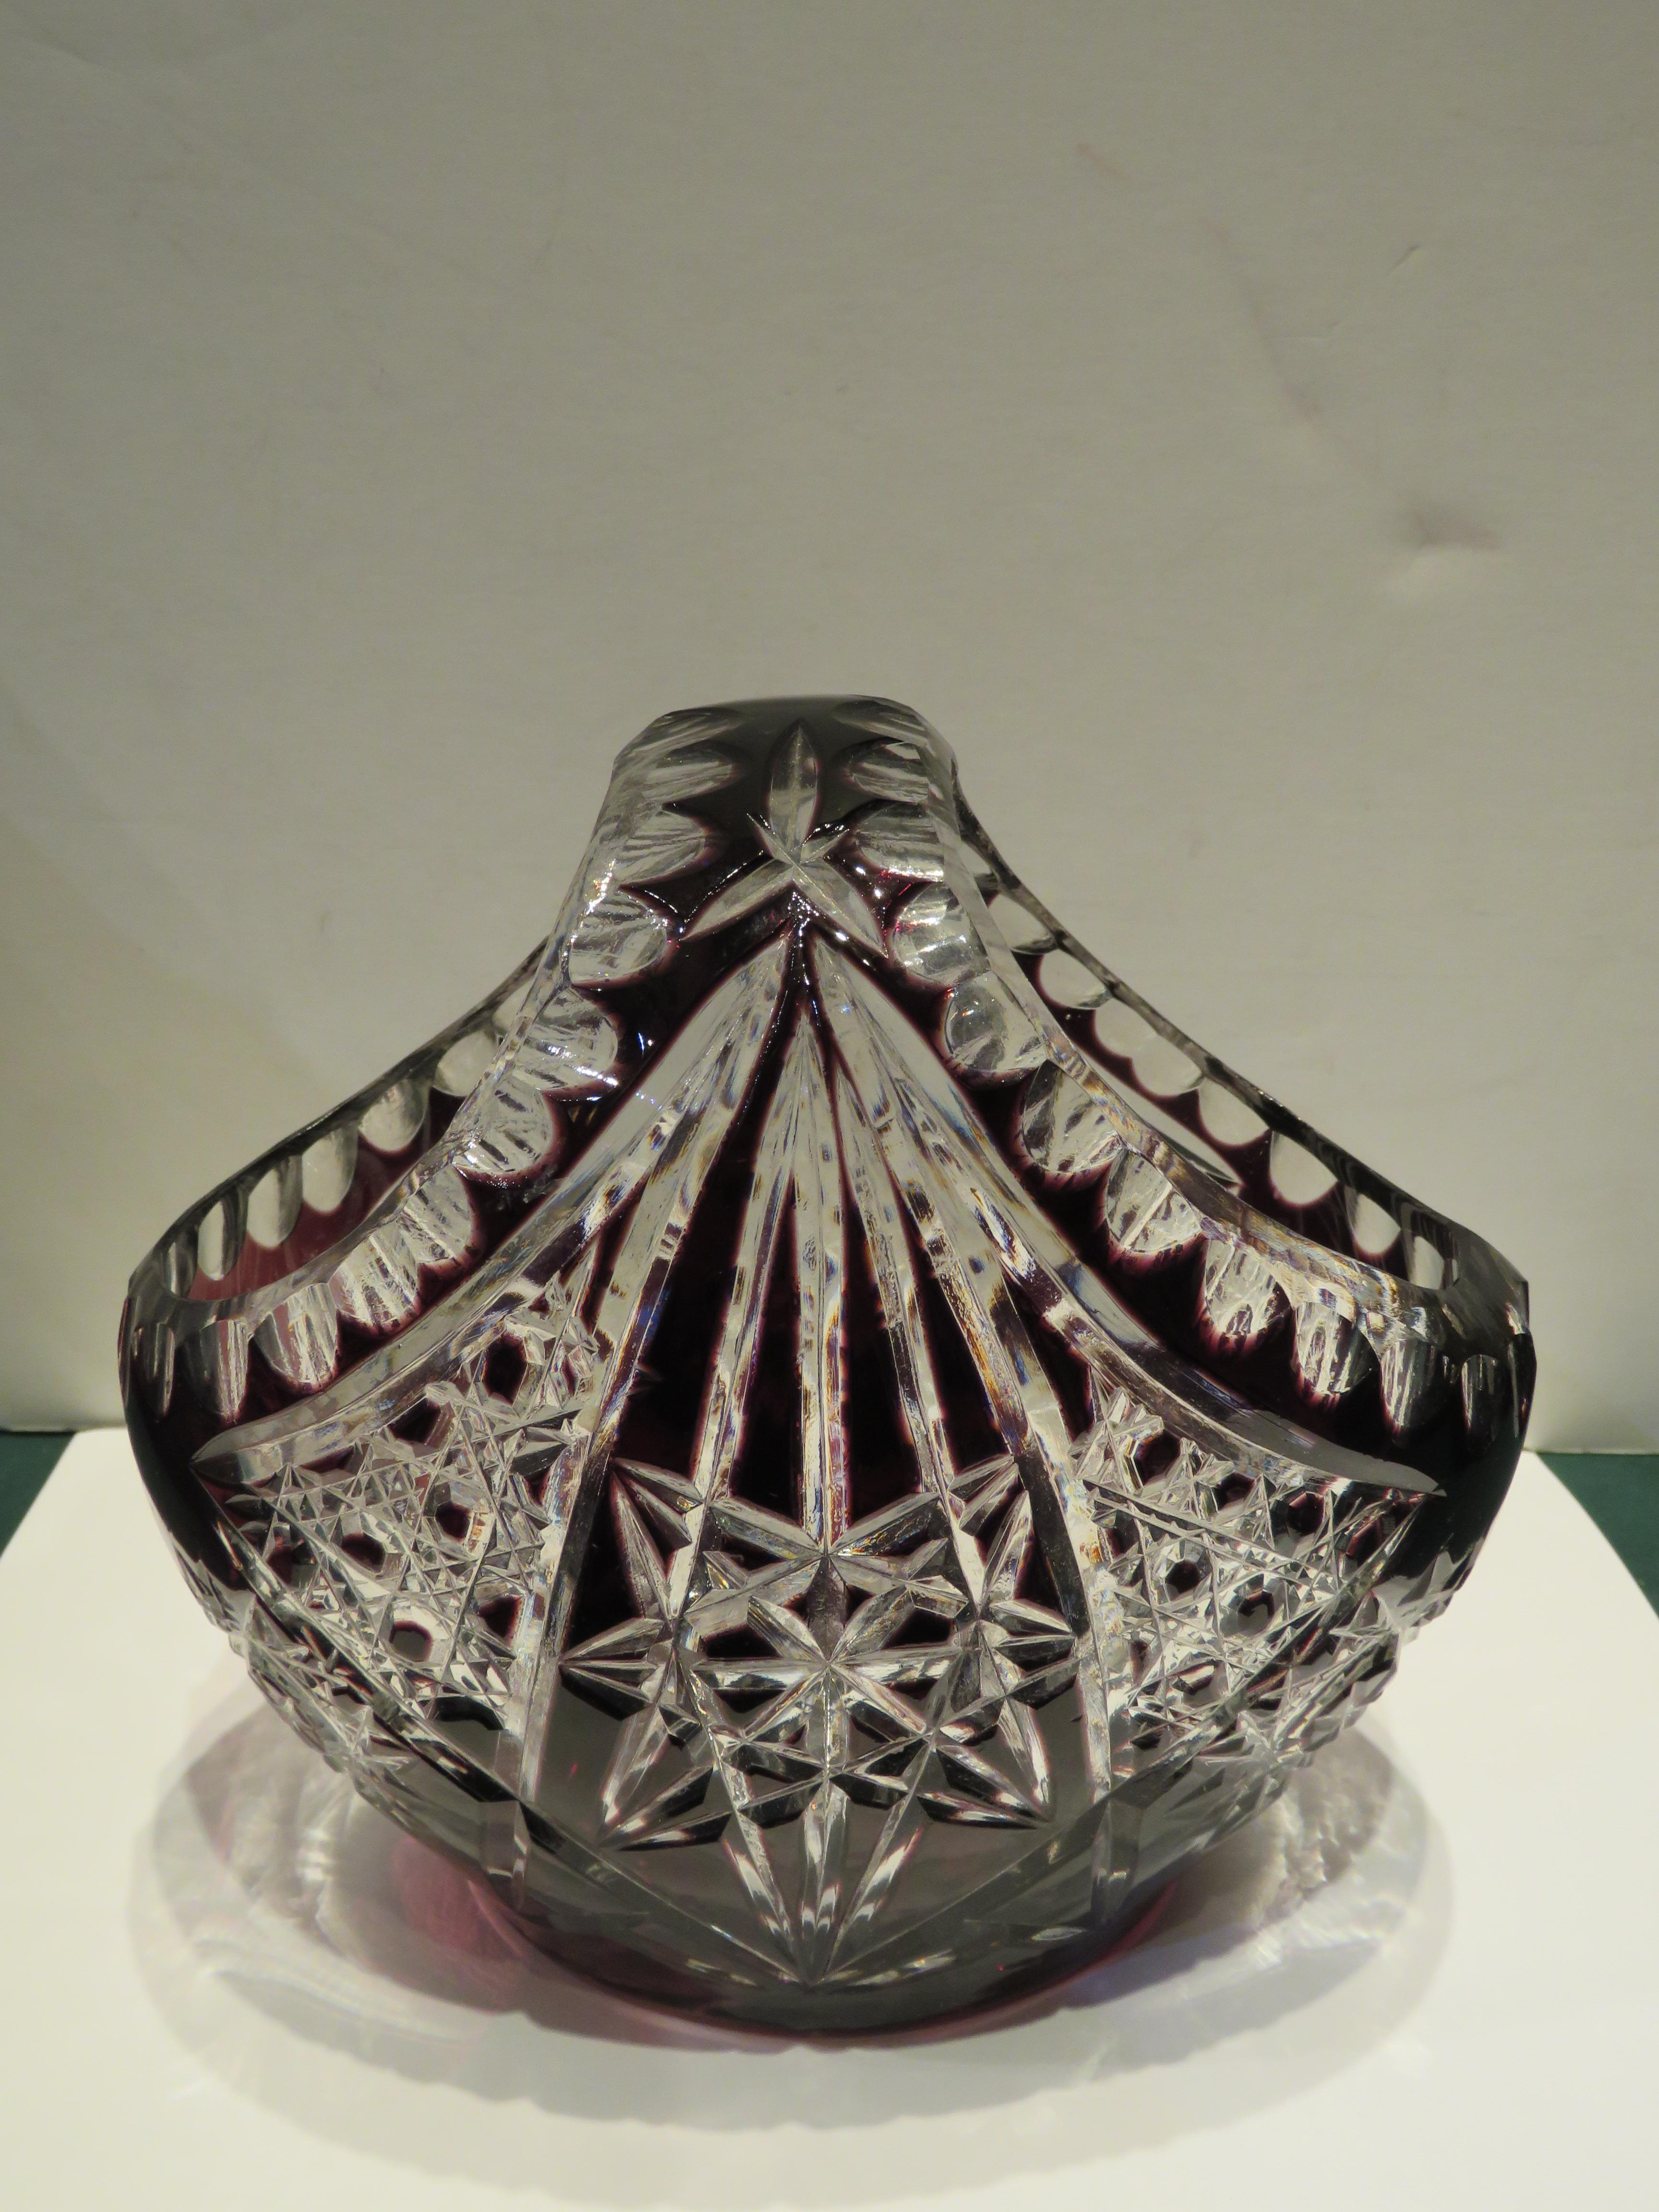 The Following Item we are offering is a Rare Antique Lovely HEAVY HANDCUT Amethyst Hand Cut Crystal Glass Basket. Basket is Finely Detailed Throughout in a Magnificent Pattern Surrounded Throughout.  
Approx: 7